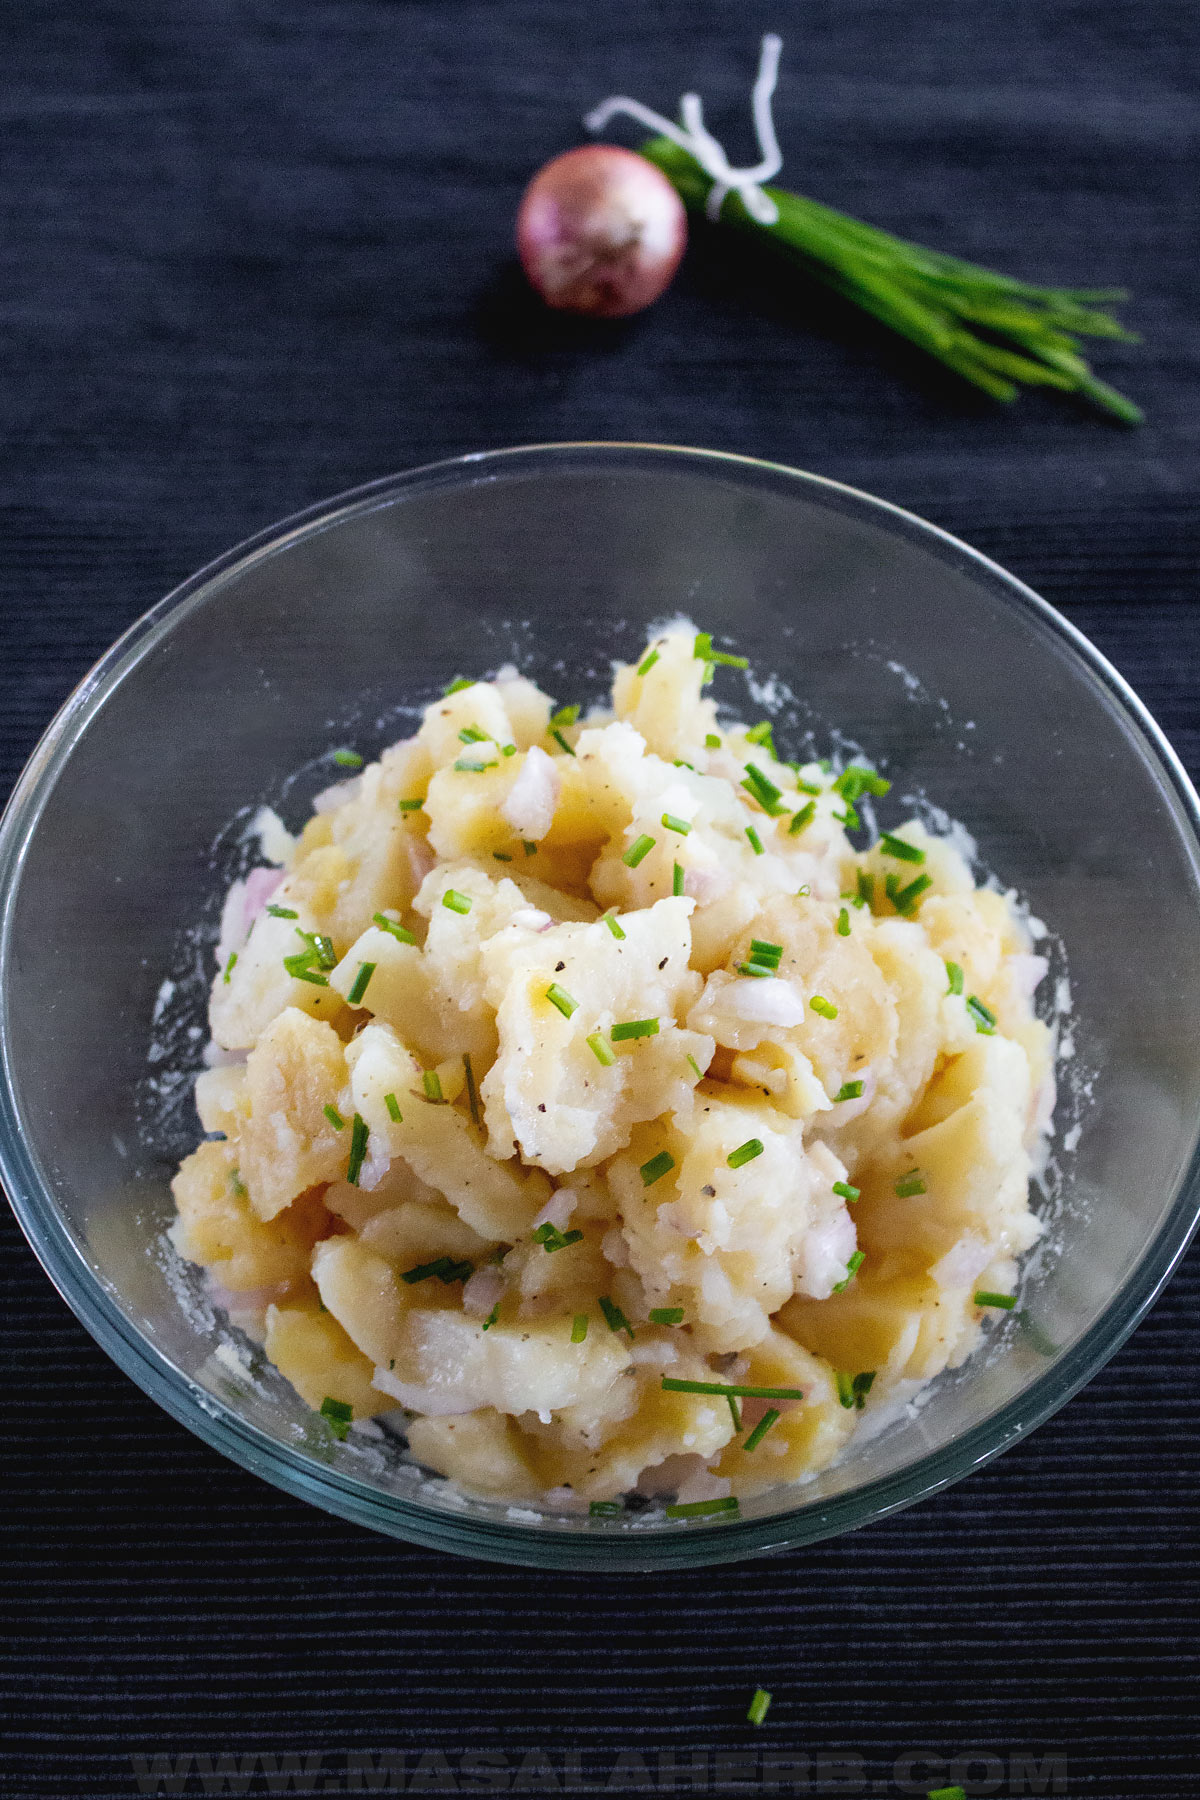 Potato salad with chives